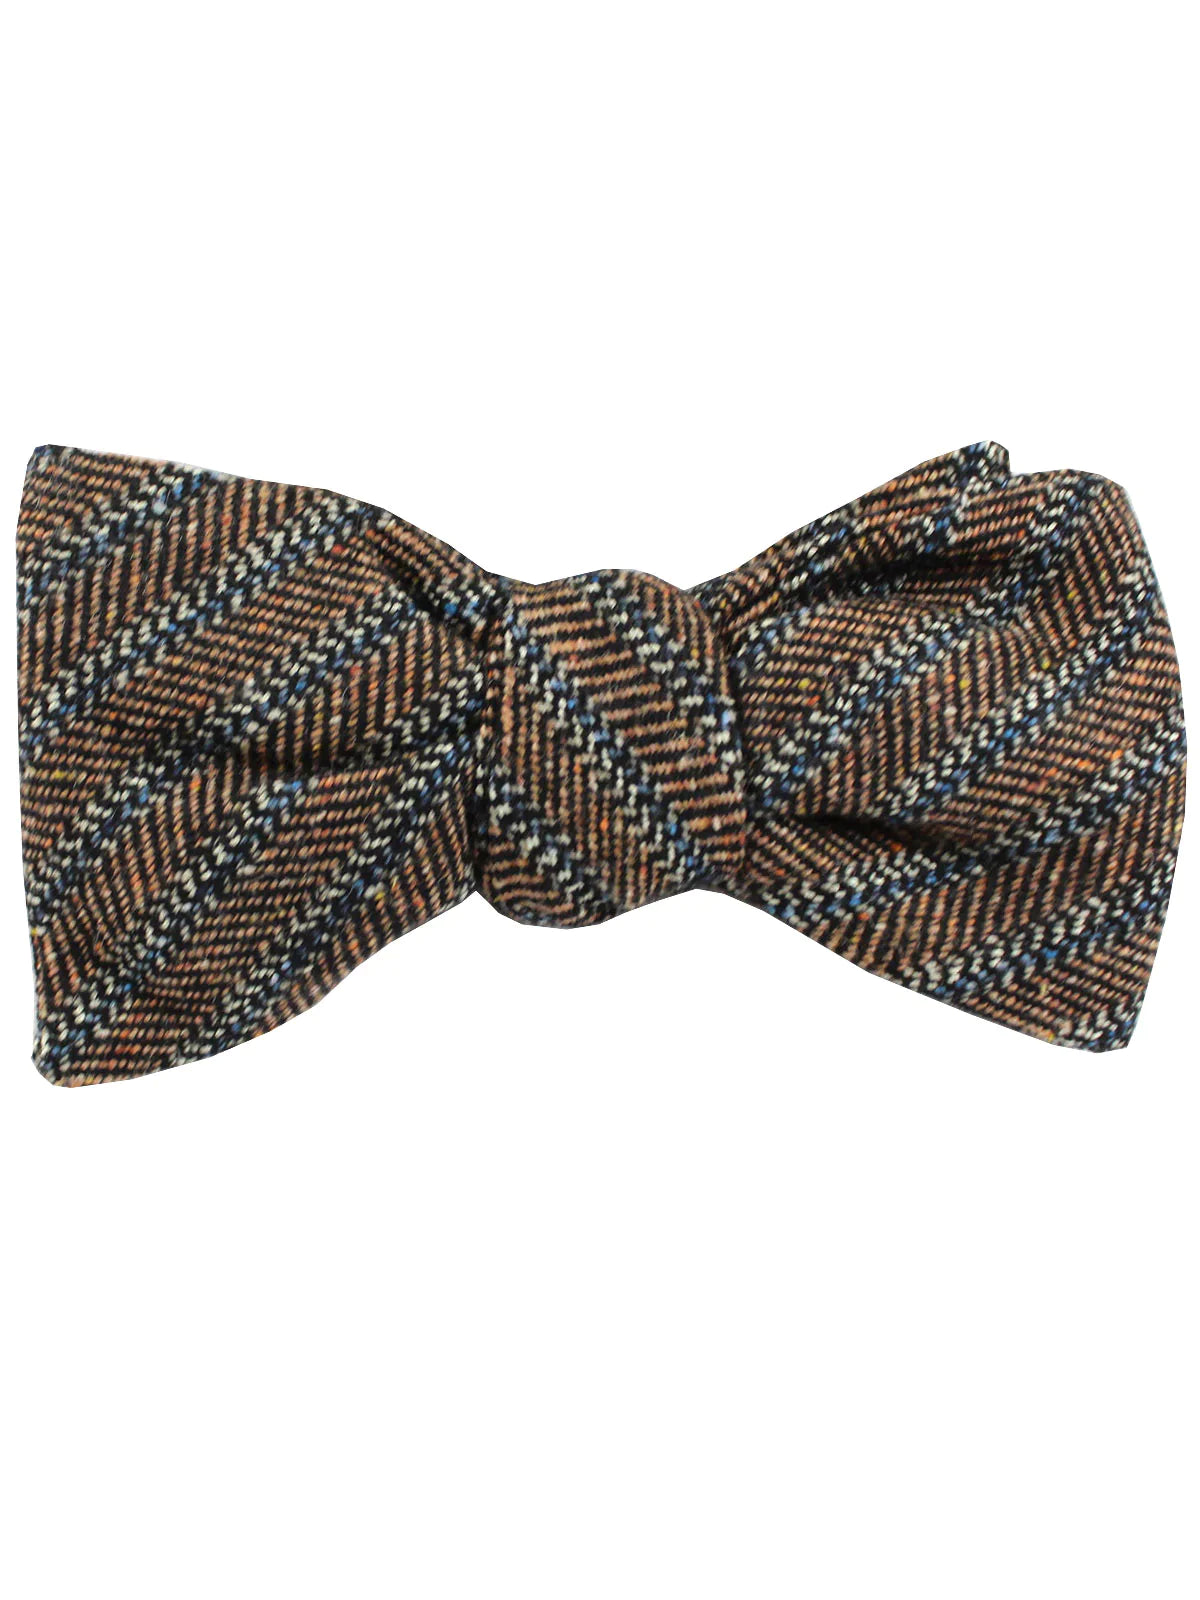 Pre-tied Gucci bowtieavailable at www.moderndaymogul.com